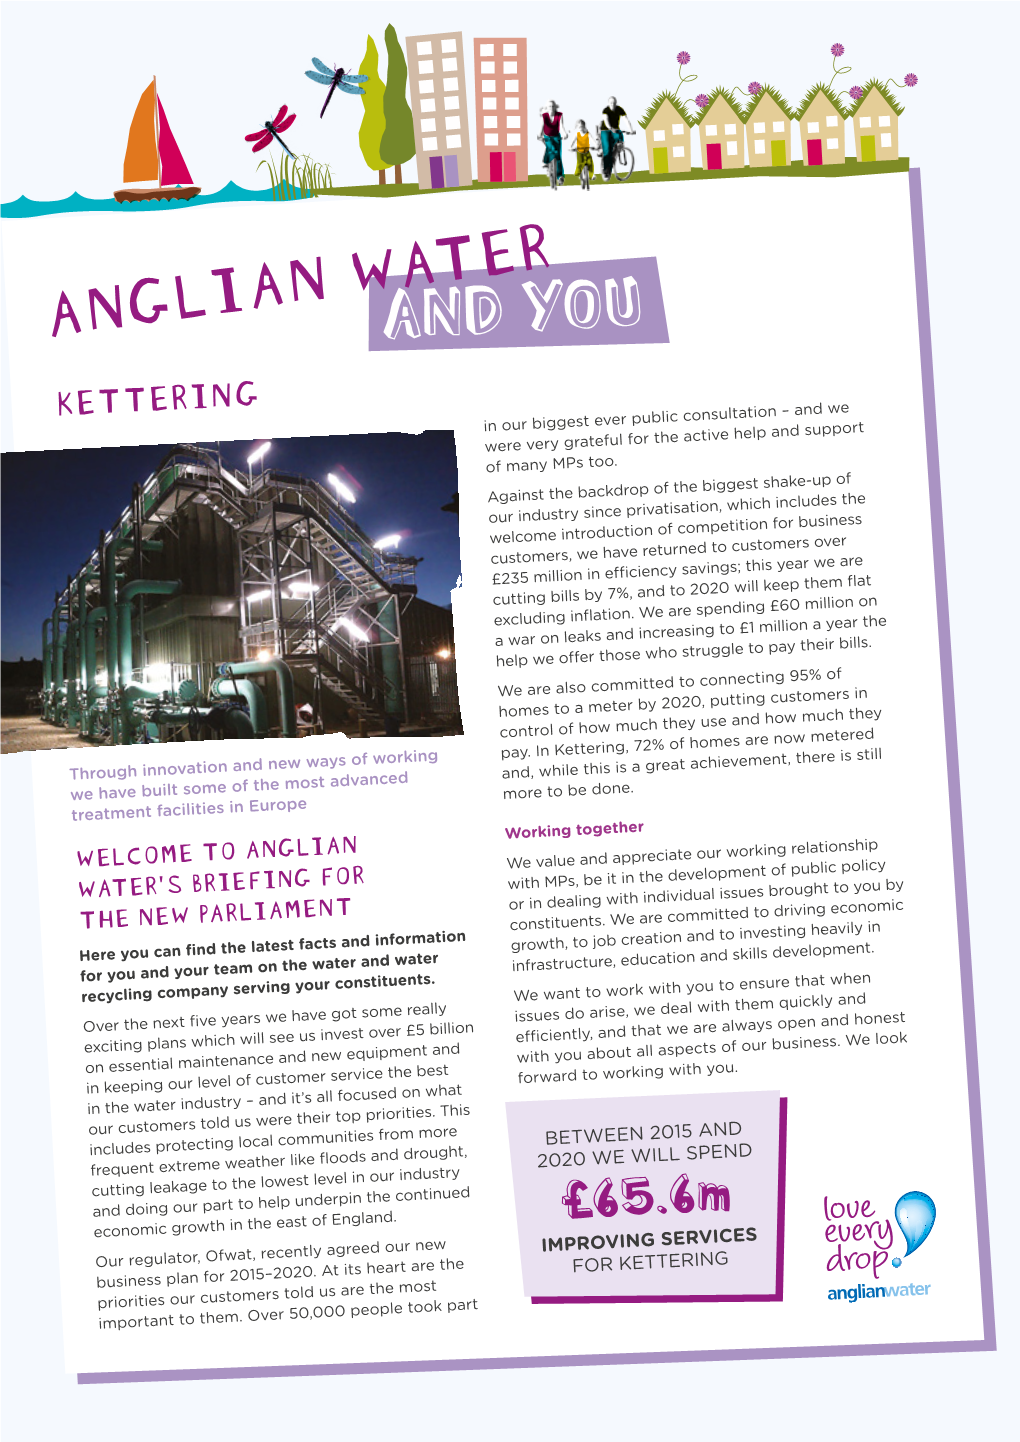 ANGLIAN WATERAND YOU KETTERING in Our Biggest Ever Public Consultation – and We Were Very Grateful for the Active Help and Support of Many Mps Too